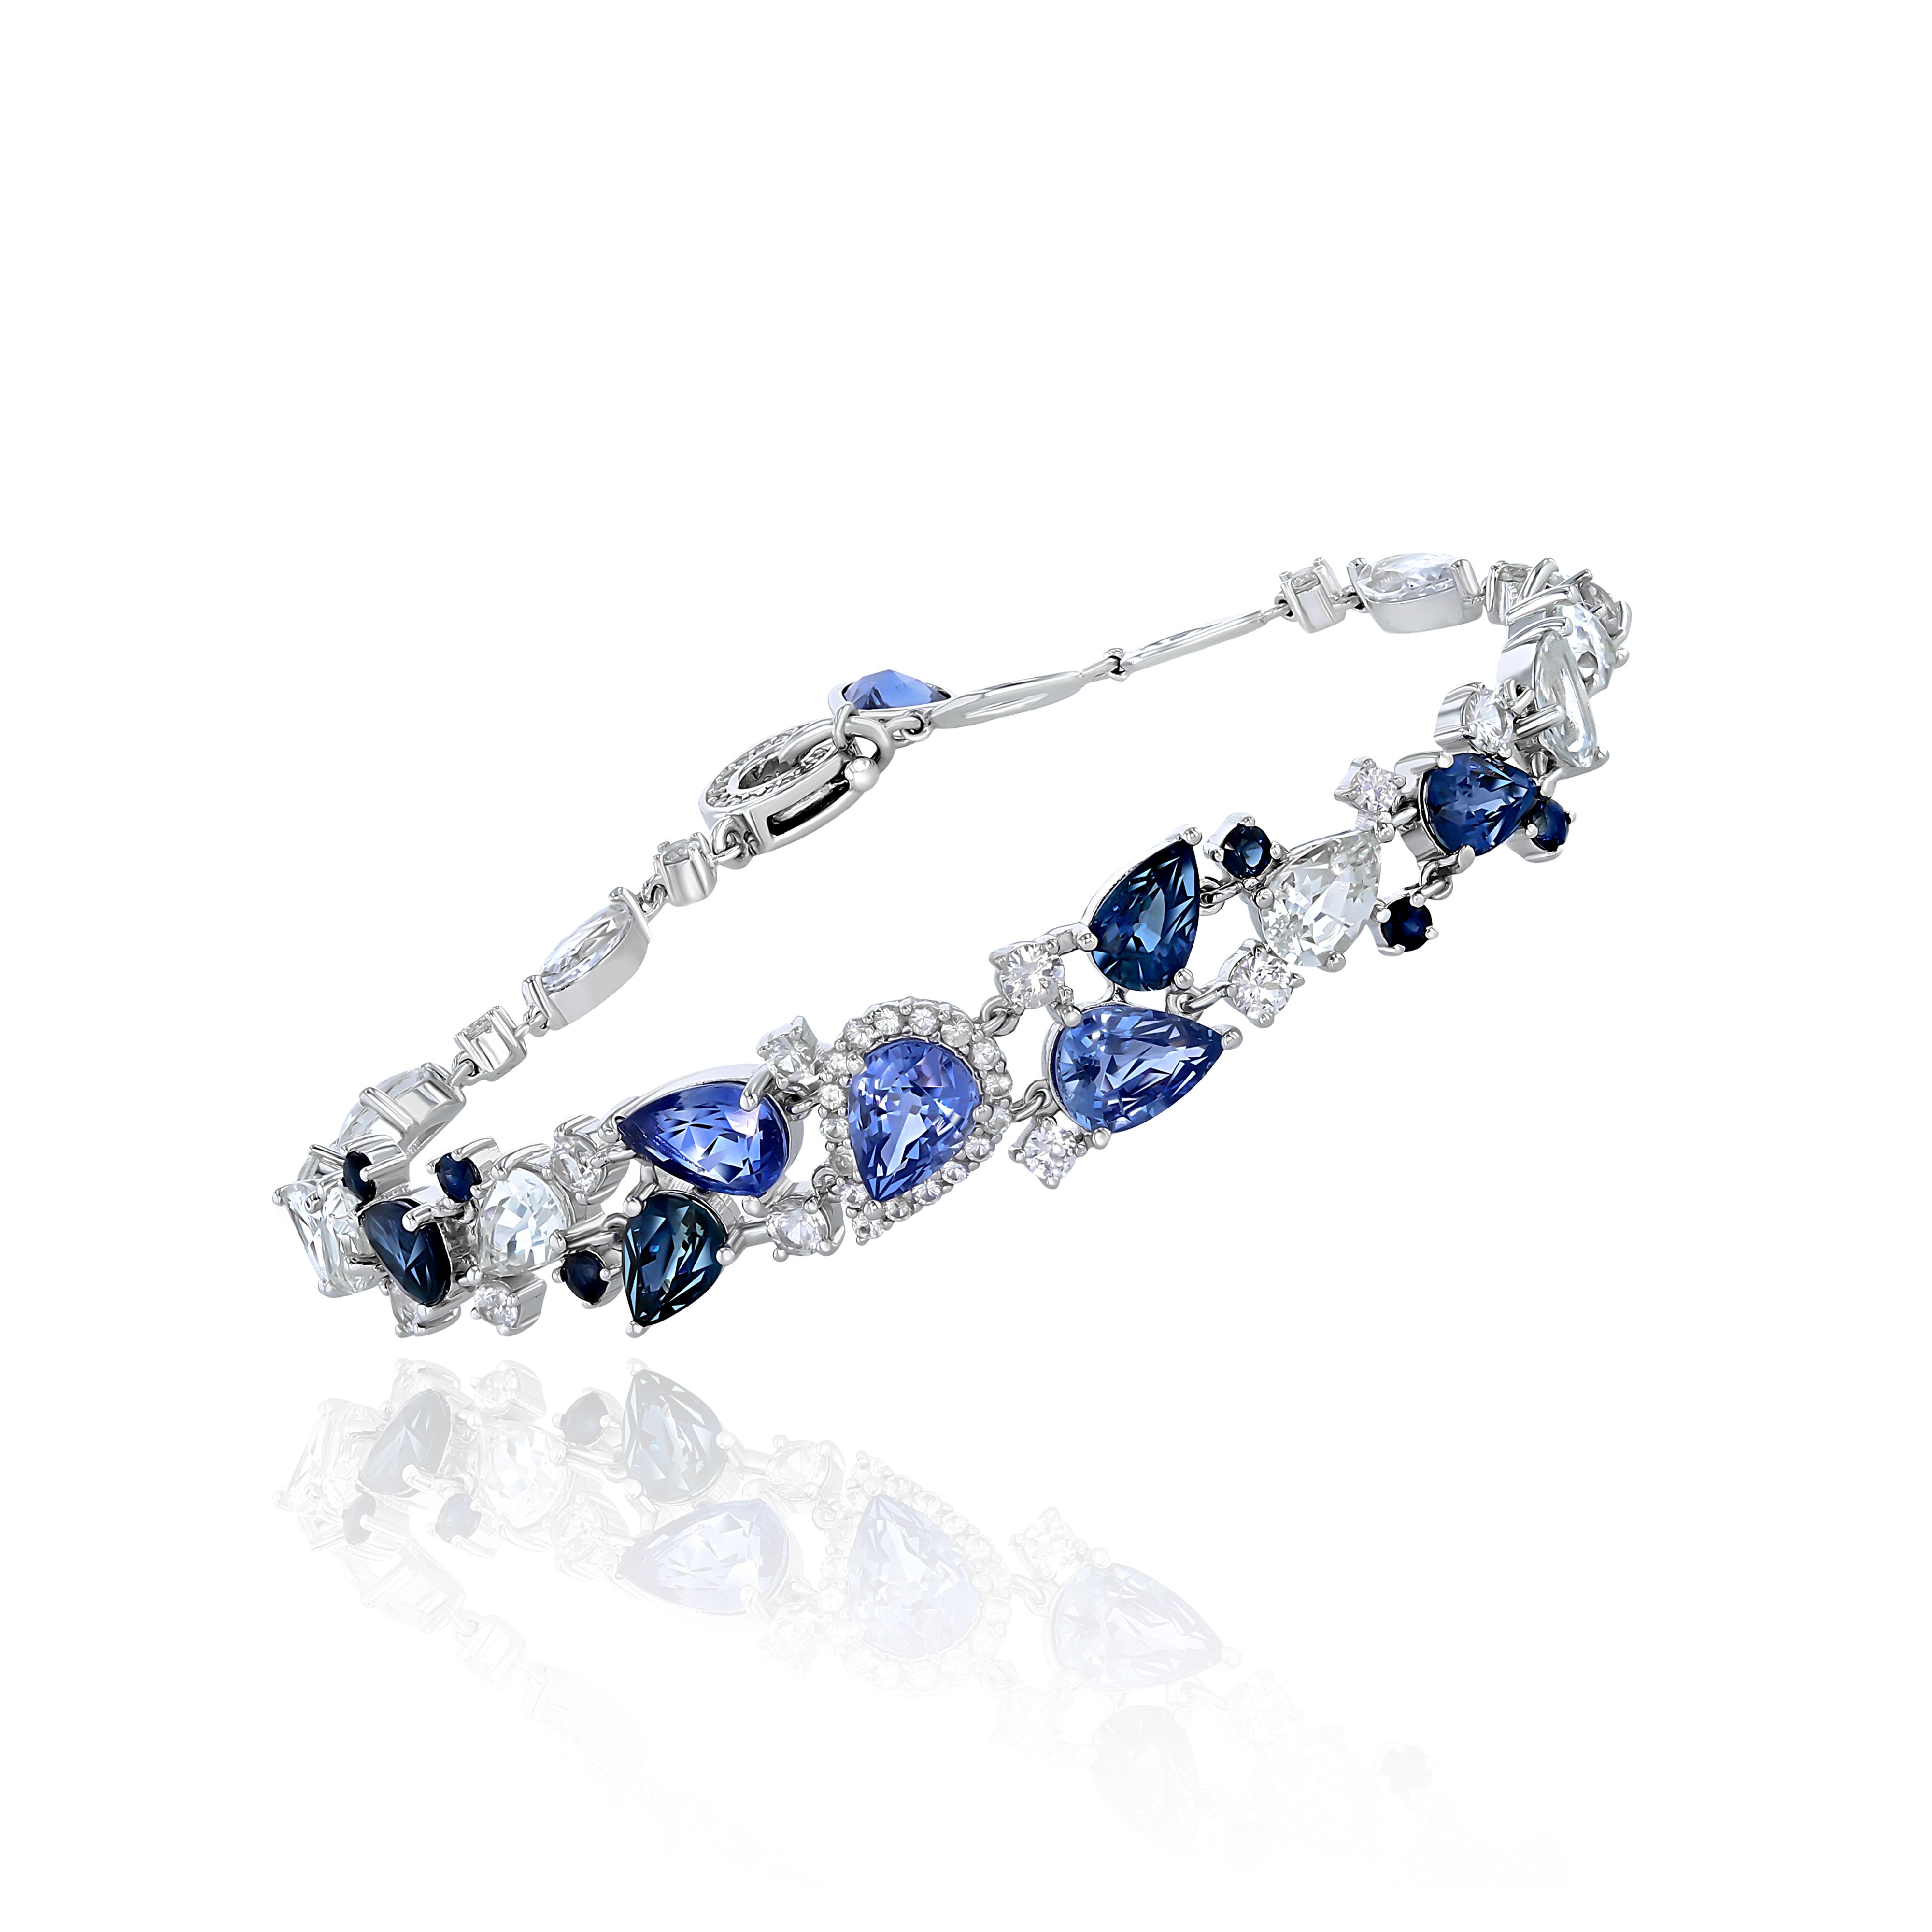 White Gold Bracelet with Blue and White Sapphires, and Diamonds, Medium